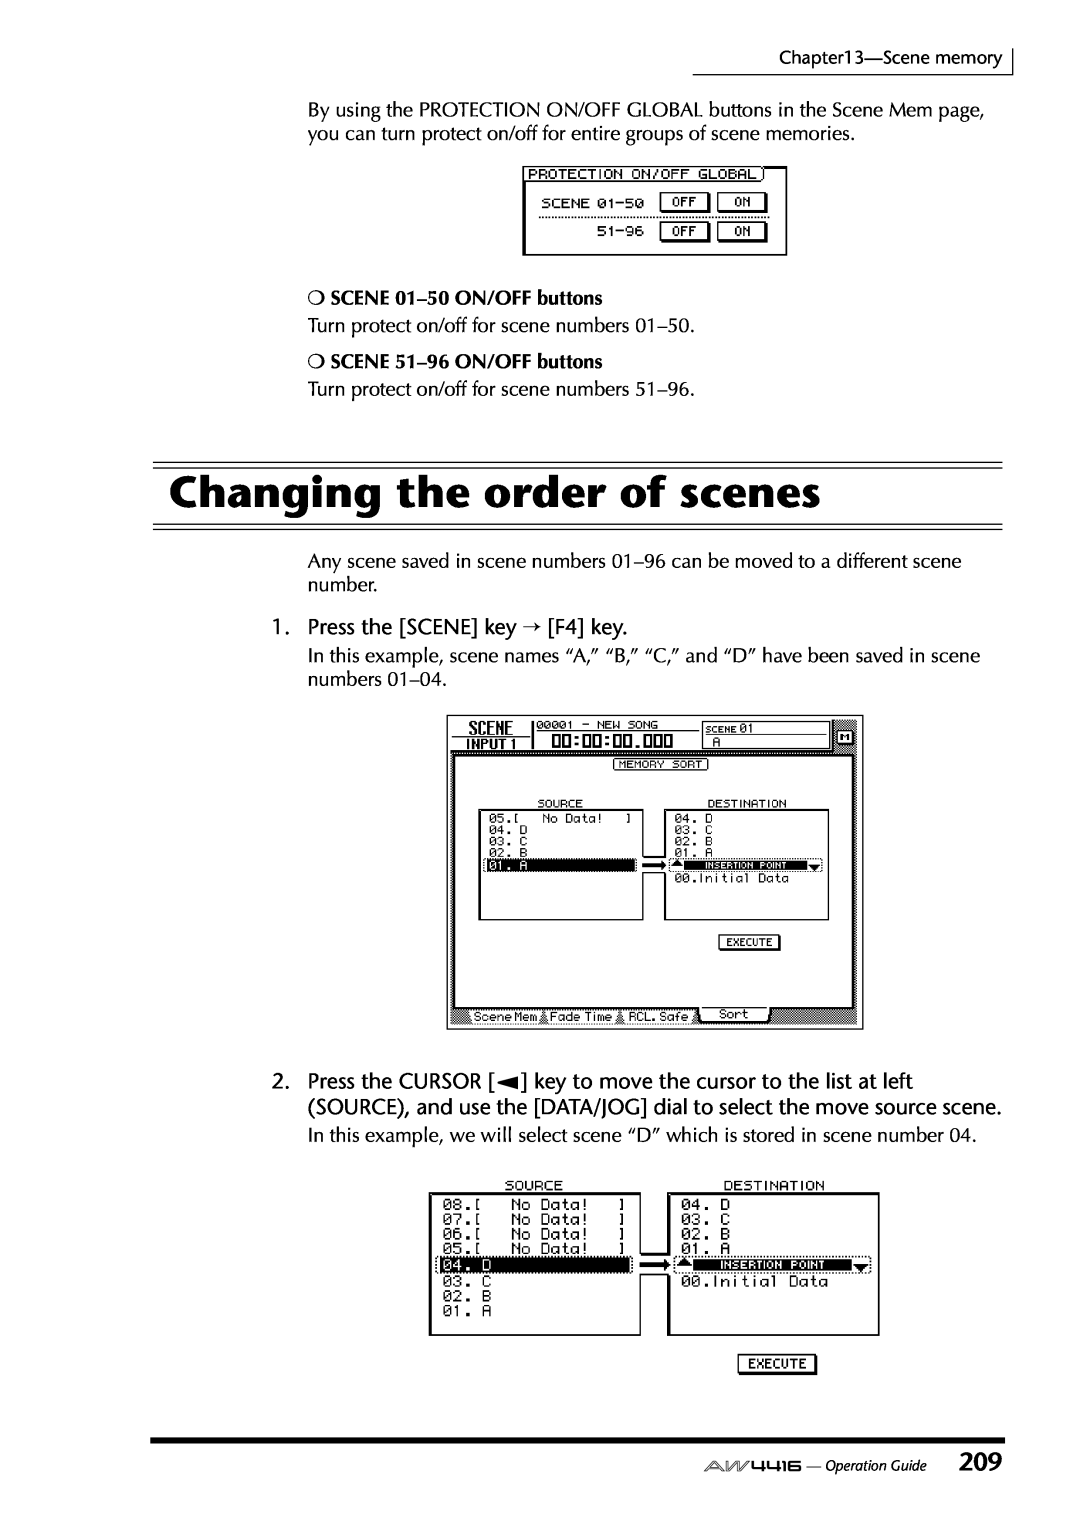 Yamaha AW4416 manual Changing the order of scenes, Press the SCENE key → F4 key, SCENE 01–50ON/OFF buttons 